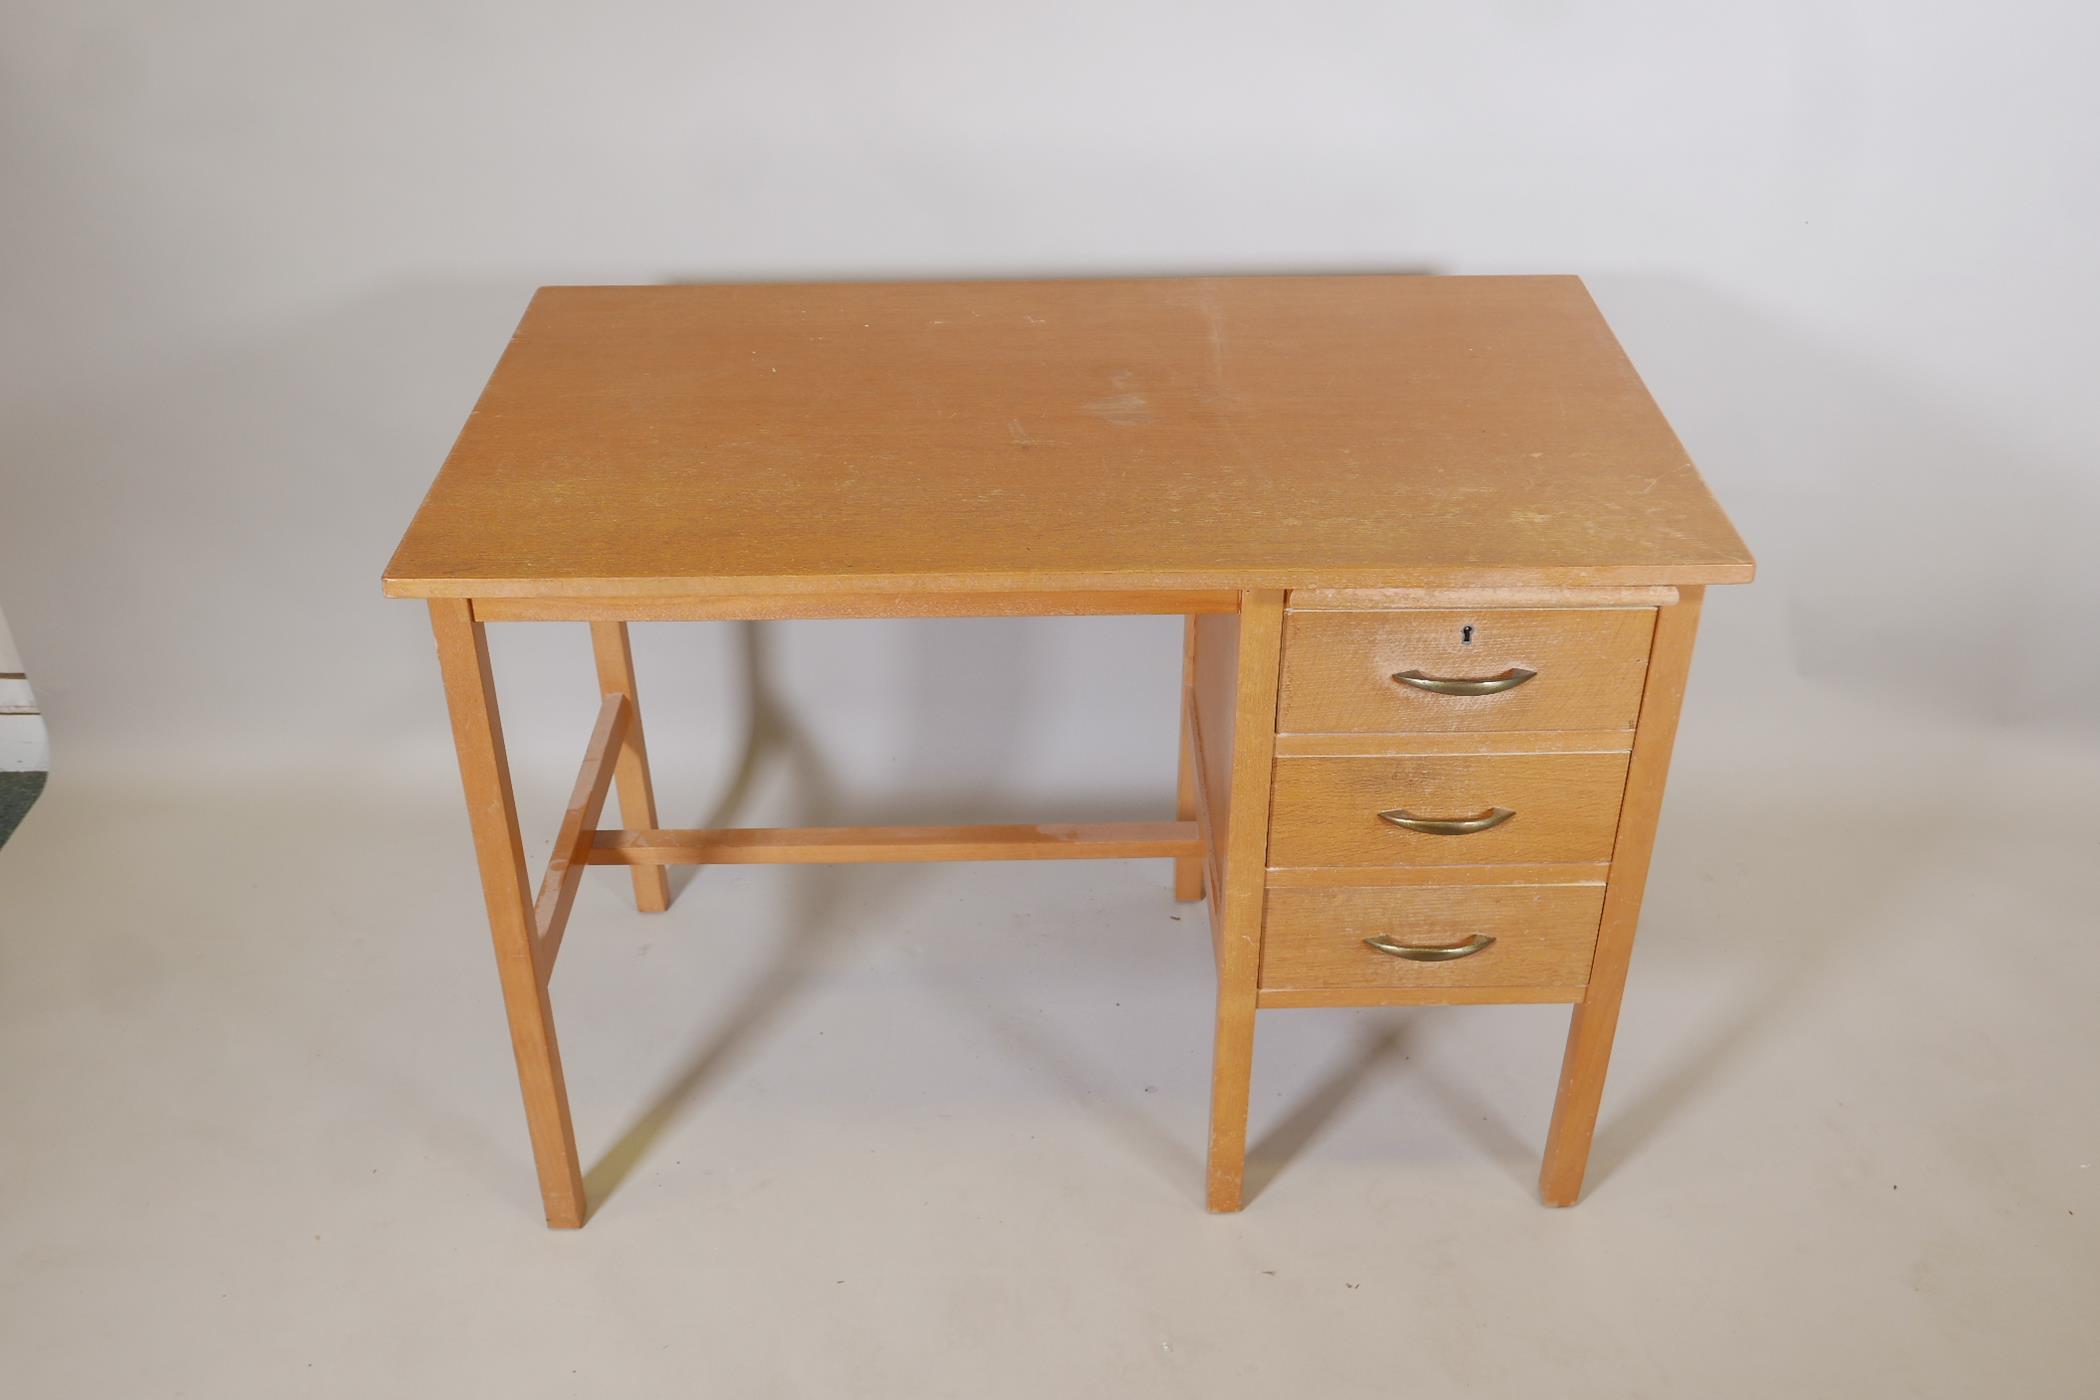 A light oak utilitarian three drawer desk with a stationery slide, 42" x 24", 30" high - Image 2 of 3